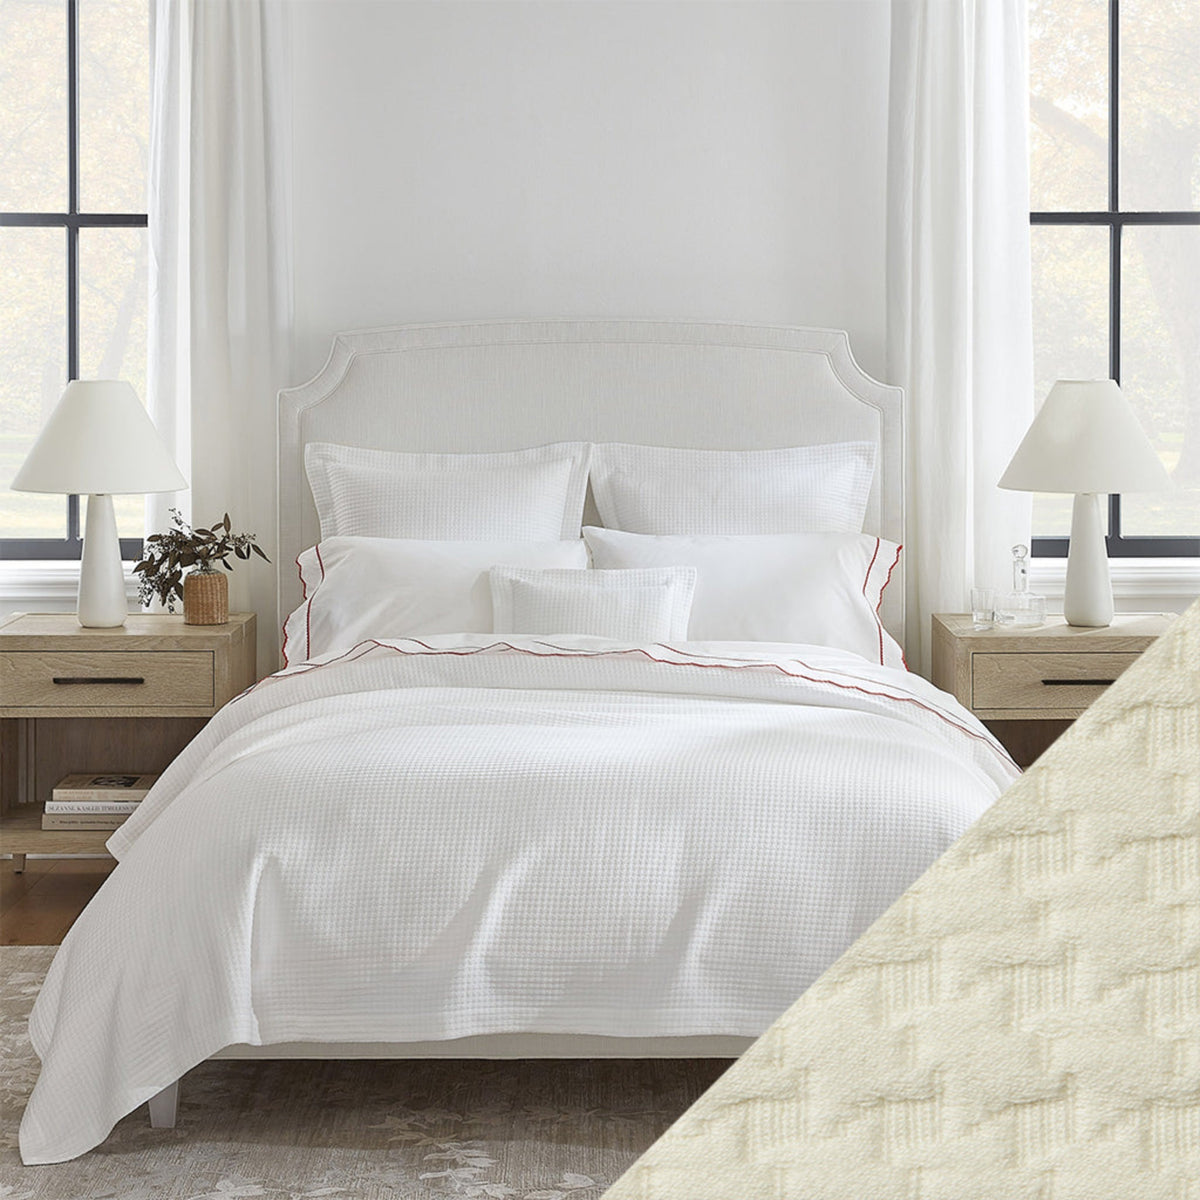 Full View of Sferra Hatteras Bedding with Ivory Swatch Sample